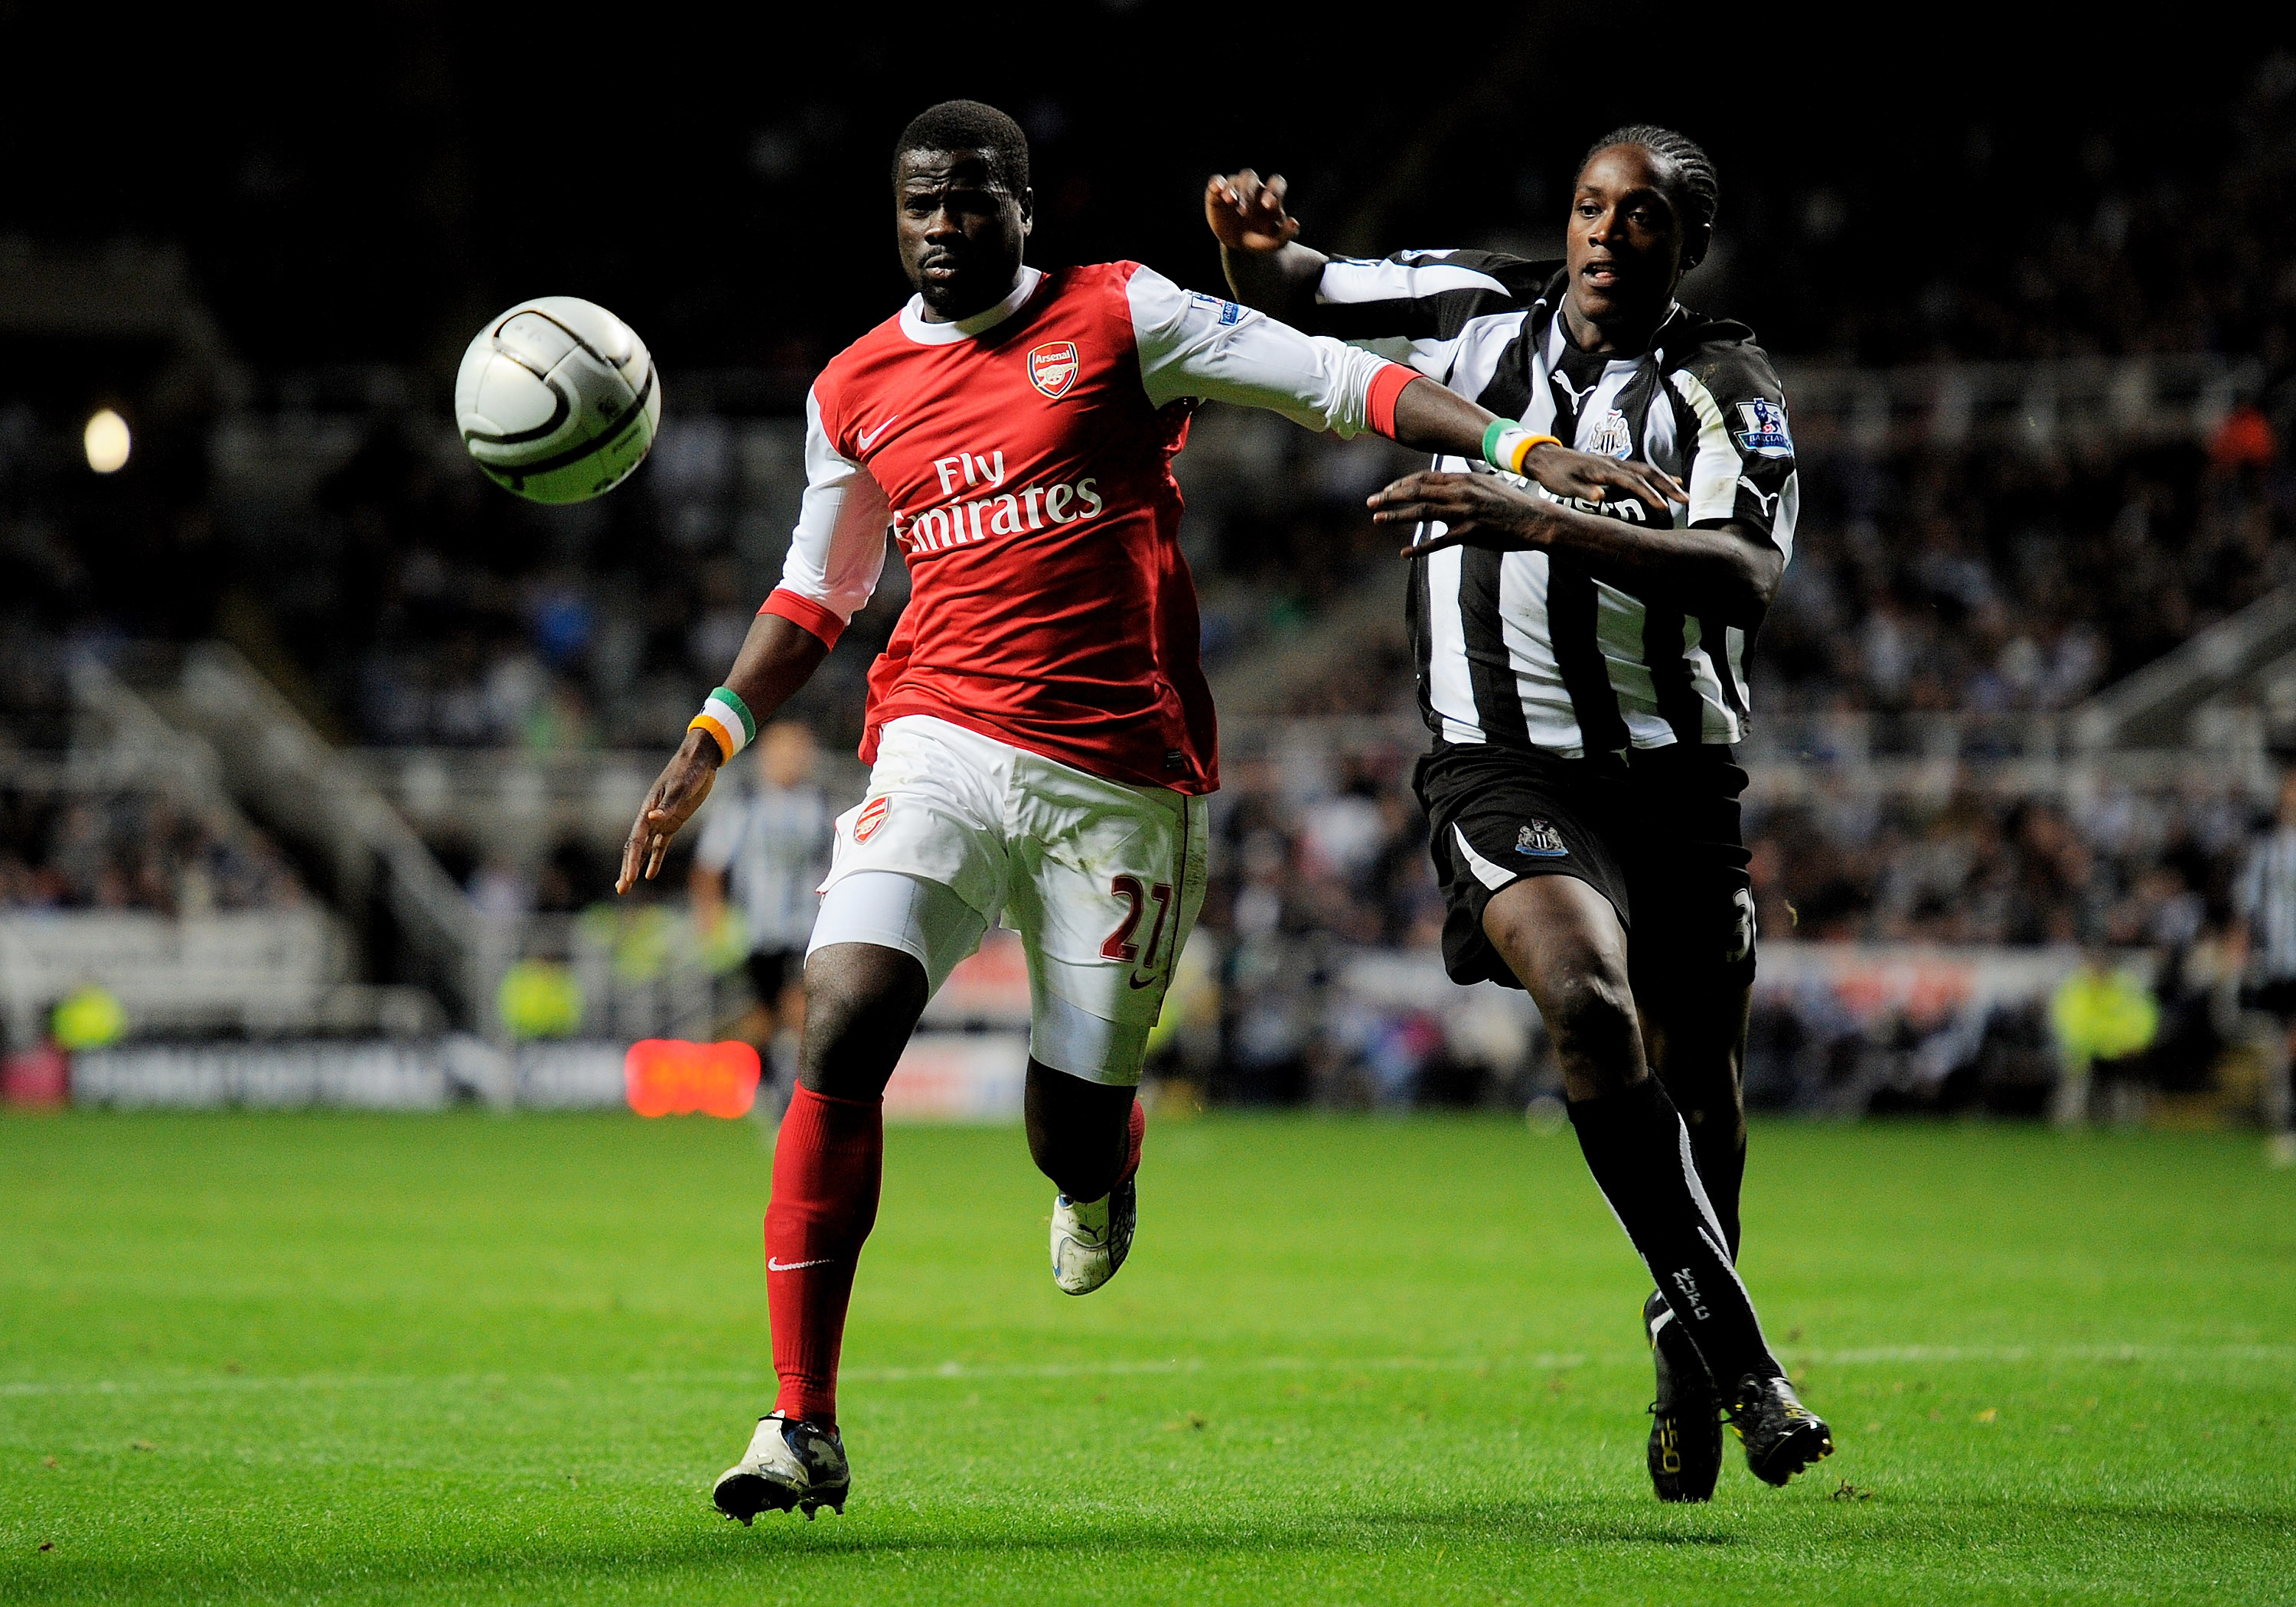 NEWCASTLE UPON TYNE, ENGLAND - OCTOBER 27:  Nile Ranger of Newcastle United competes with Emmanuel Eboue of Arsenal during the Carling Cup Fourth Round match between Newcastle United and Arsenal at St James' Park on October 27, 2010 in Newcastle, England.